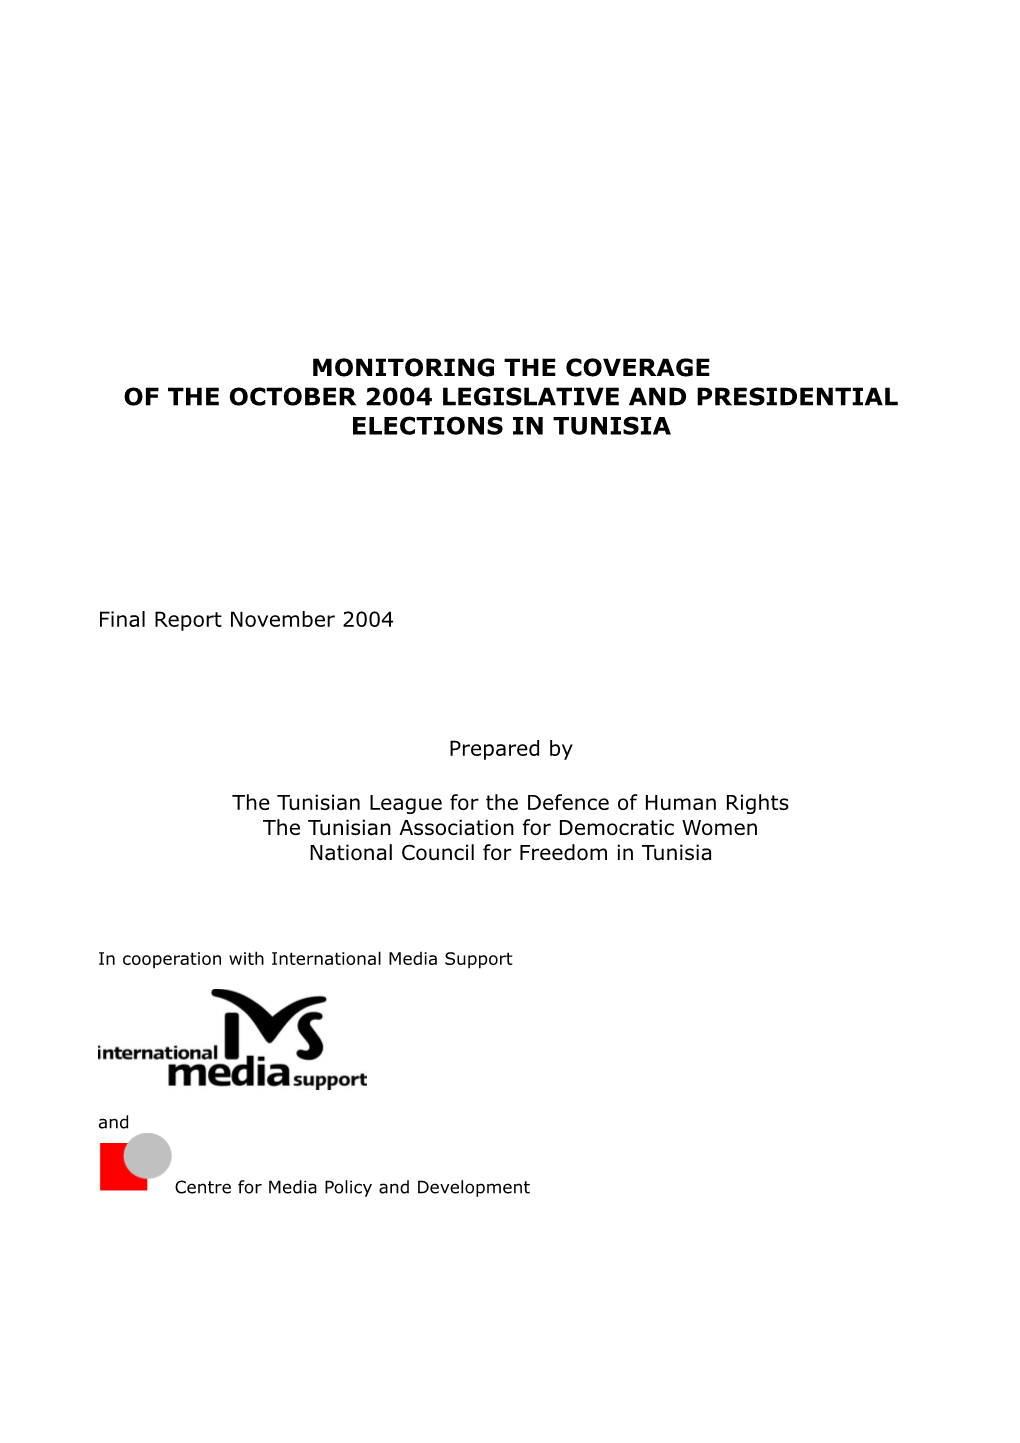 Media Monitoring of Election Coverage: Conclusions